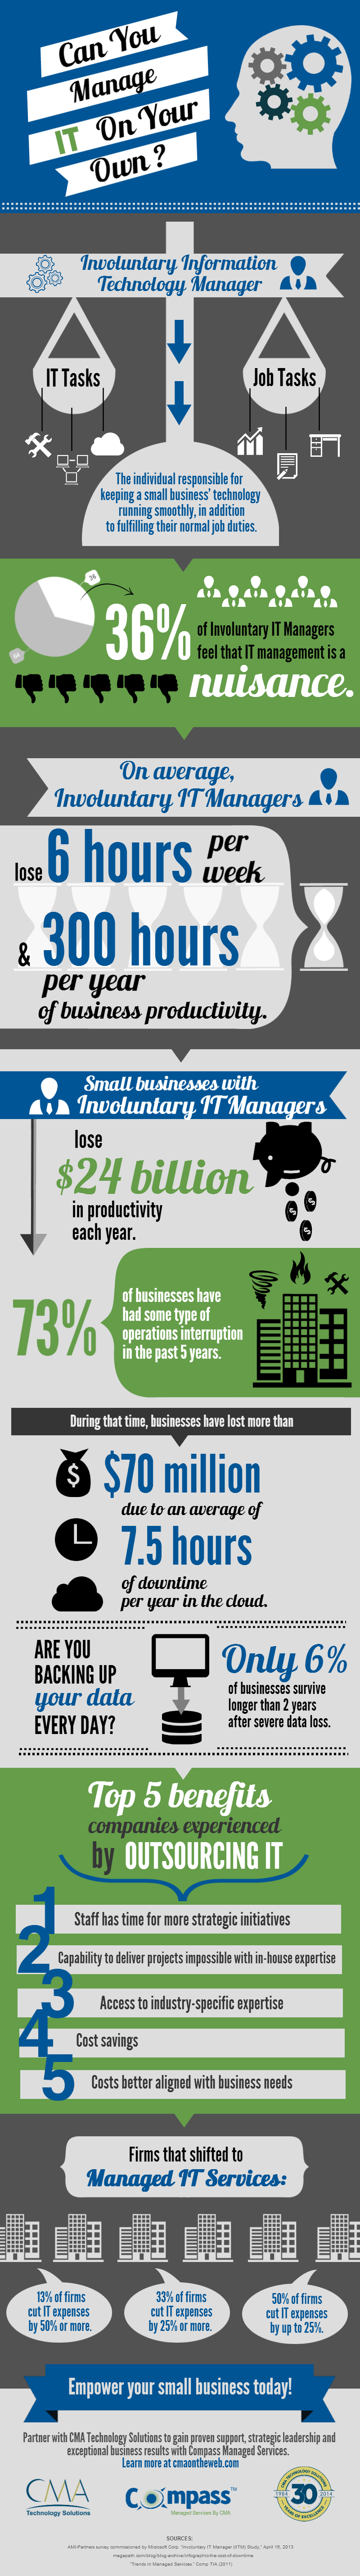 Compass_Infographic_managed_IT